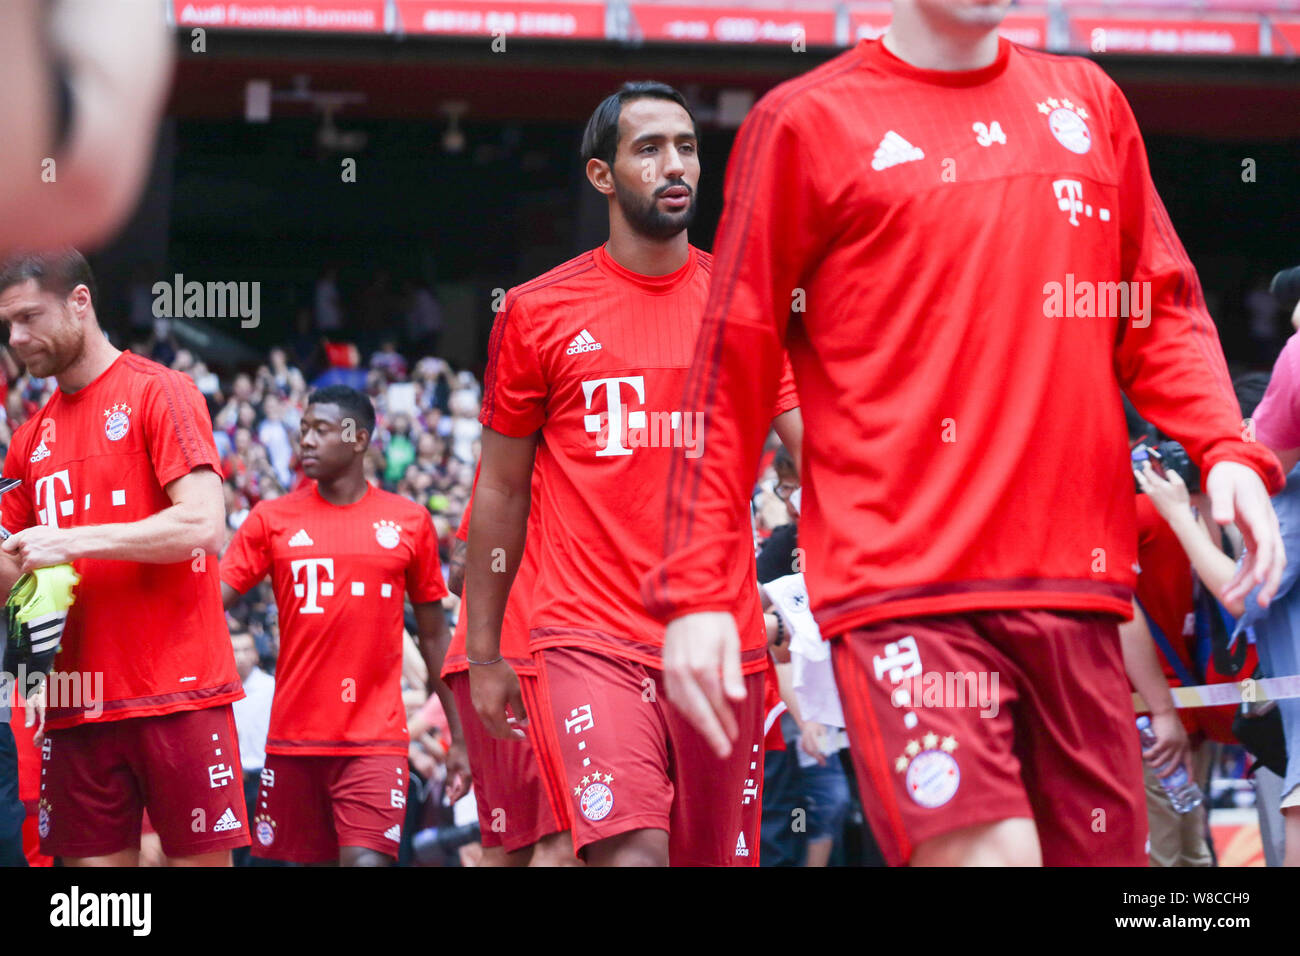 Medhi Benatia of Bayern Munich FC, center, arrives at a training session for the Audi Football Summer Tour China 2015 in Beijing, China, 17 July 2015. Stock Photo